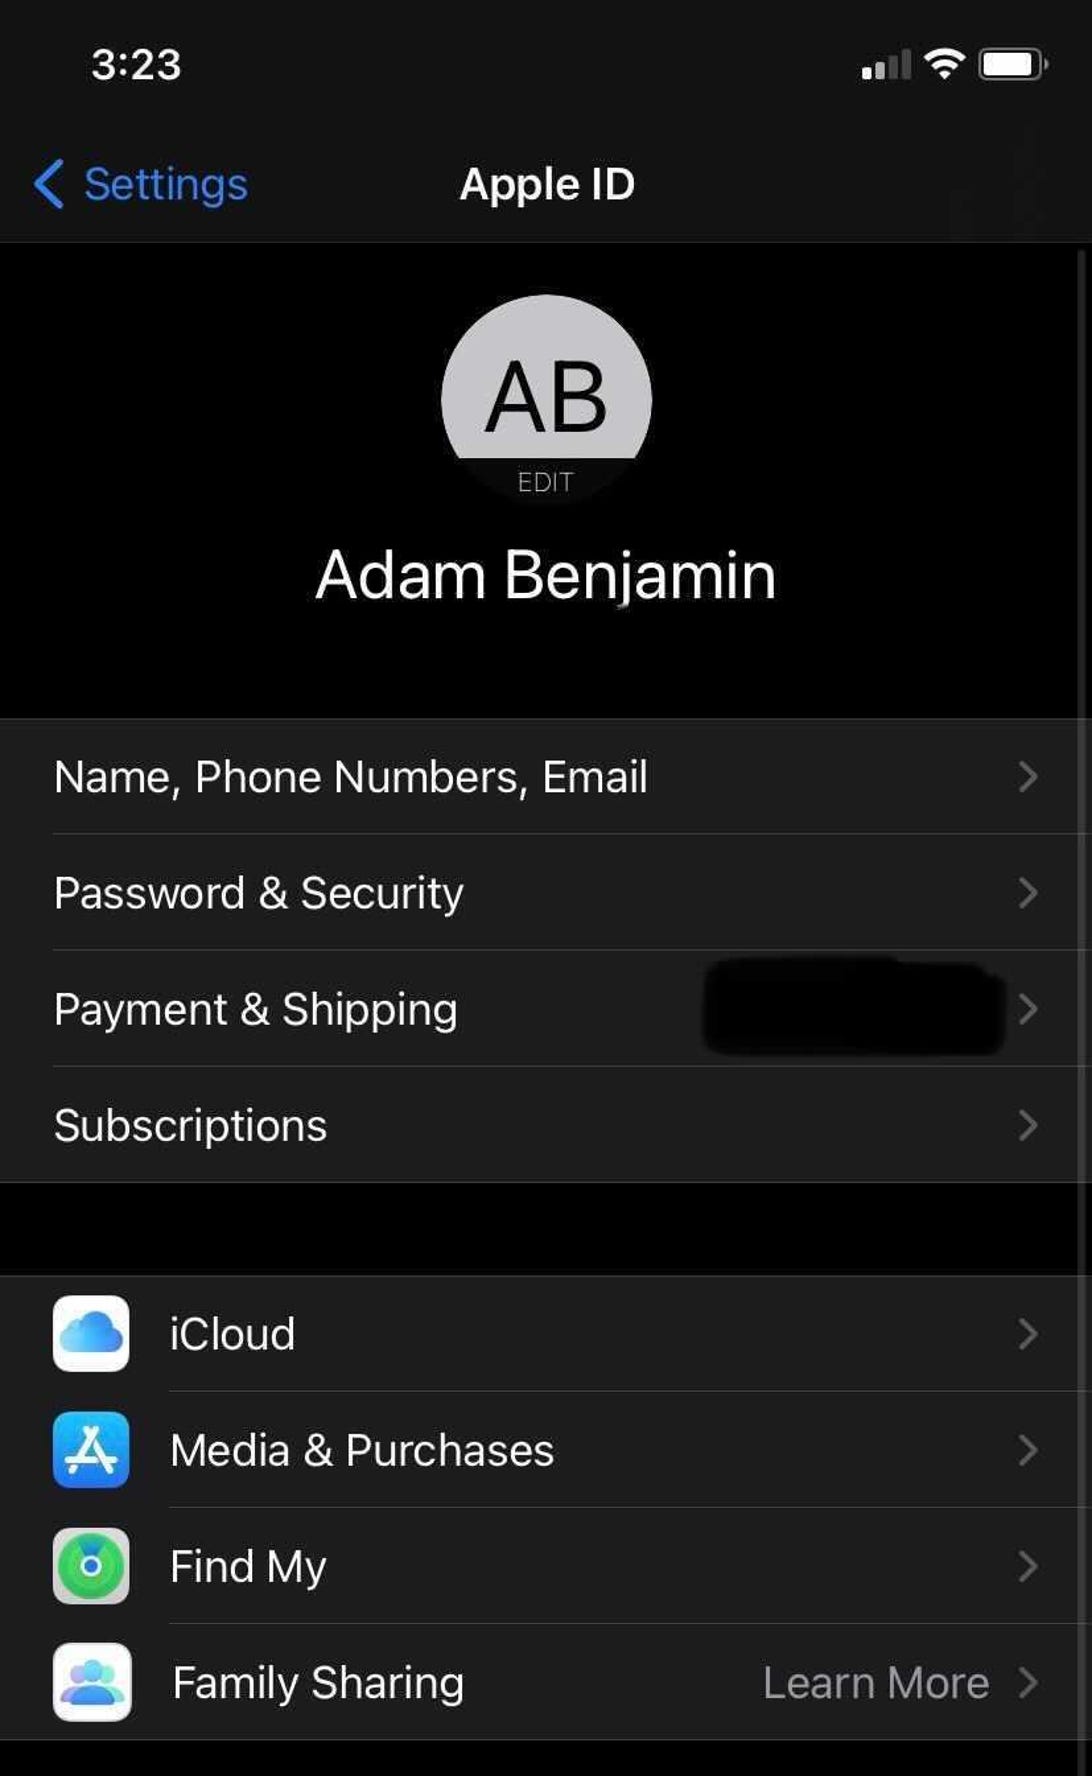 Us users can now download all their apple account data here’s how to do it